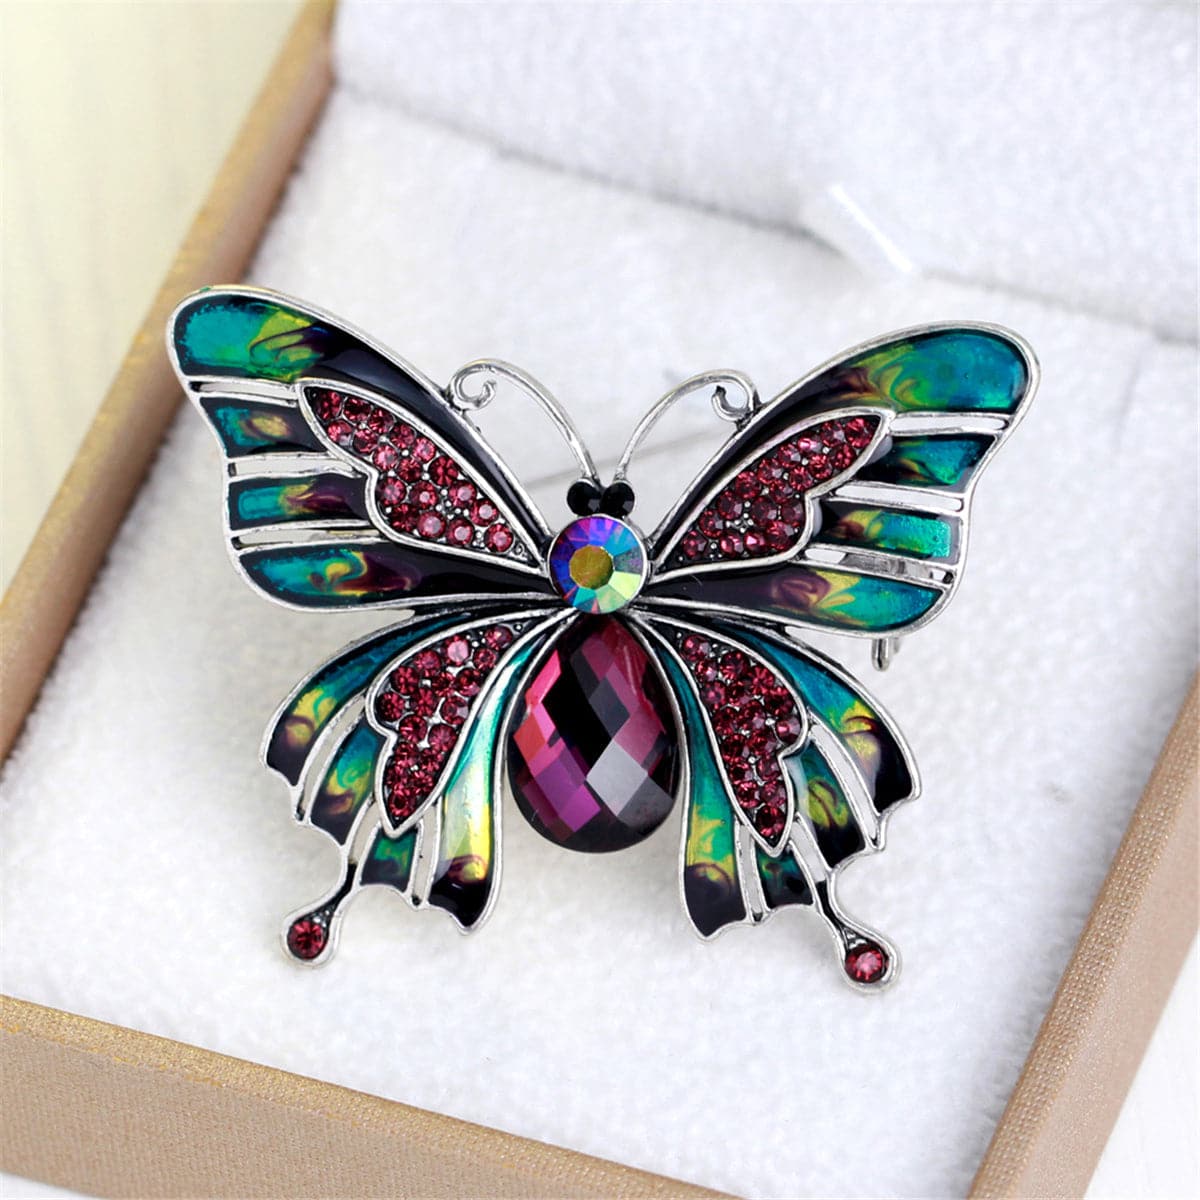 Pink & Teal Cubic Zirconia & Crystal Butterfly Brooch